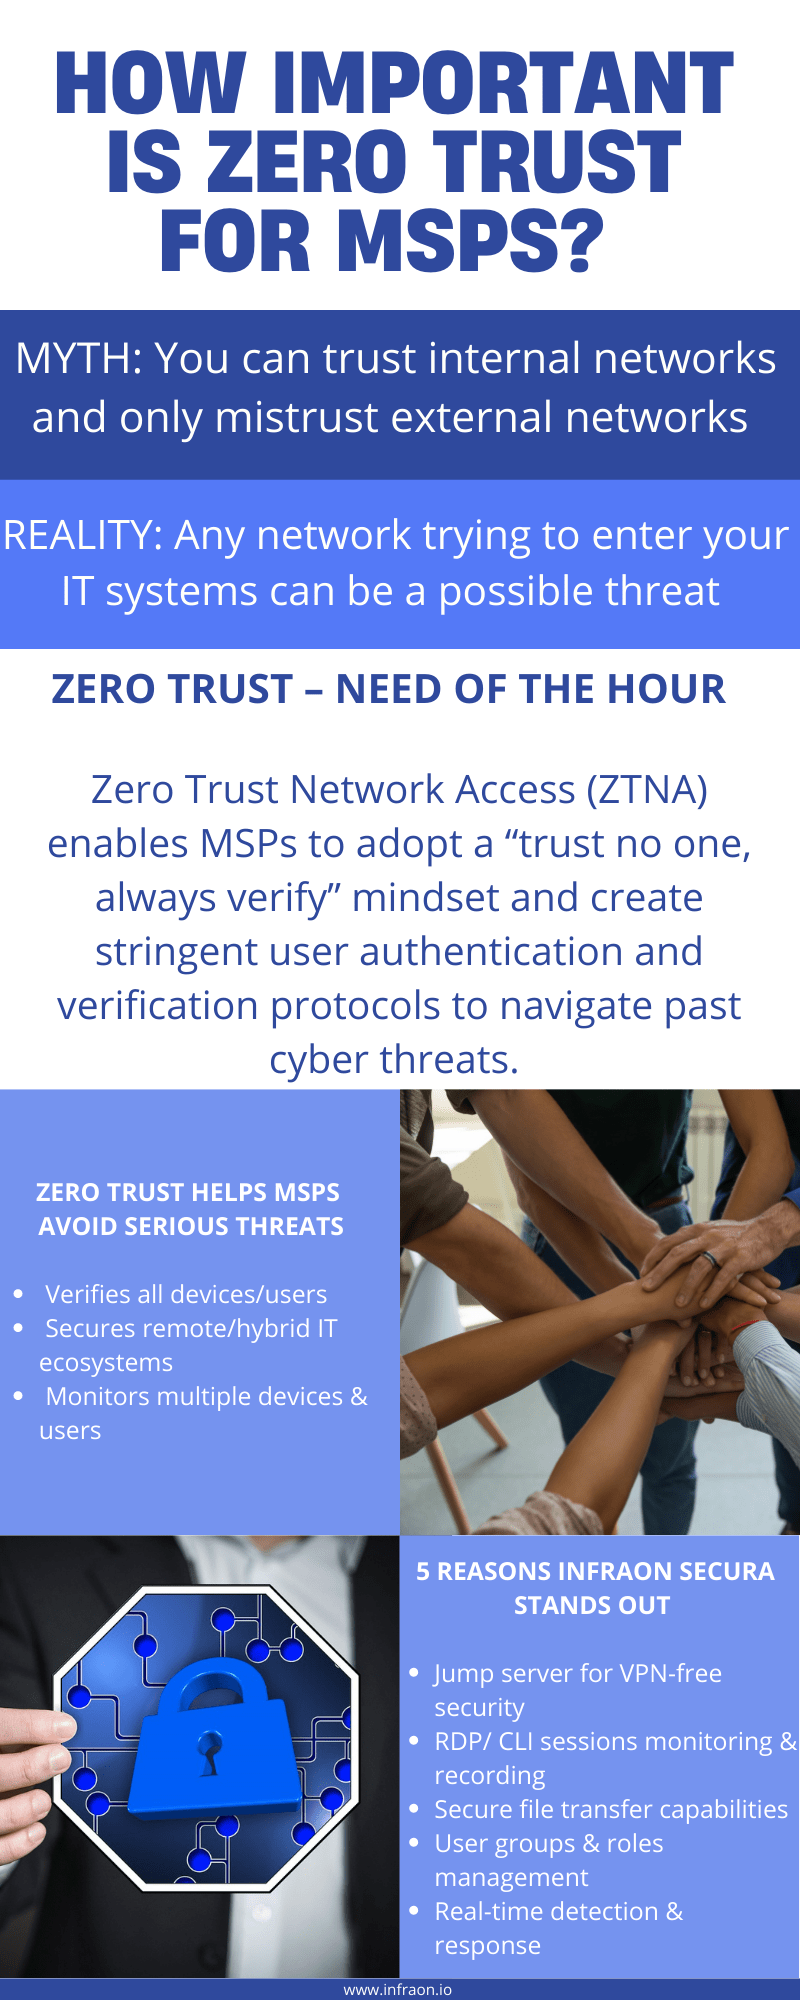 How important is Zero Trust for MSPs